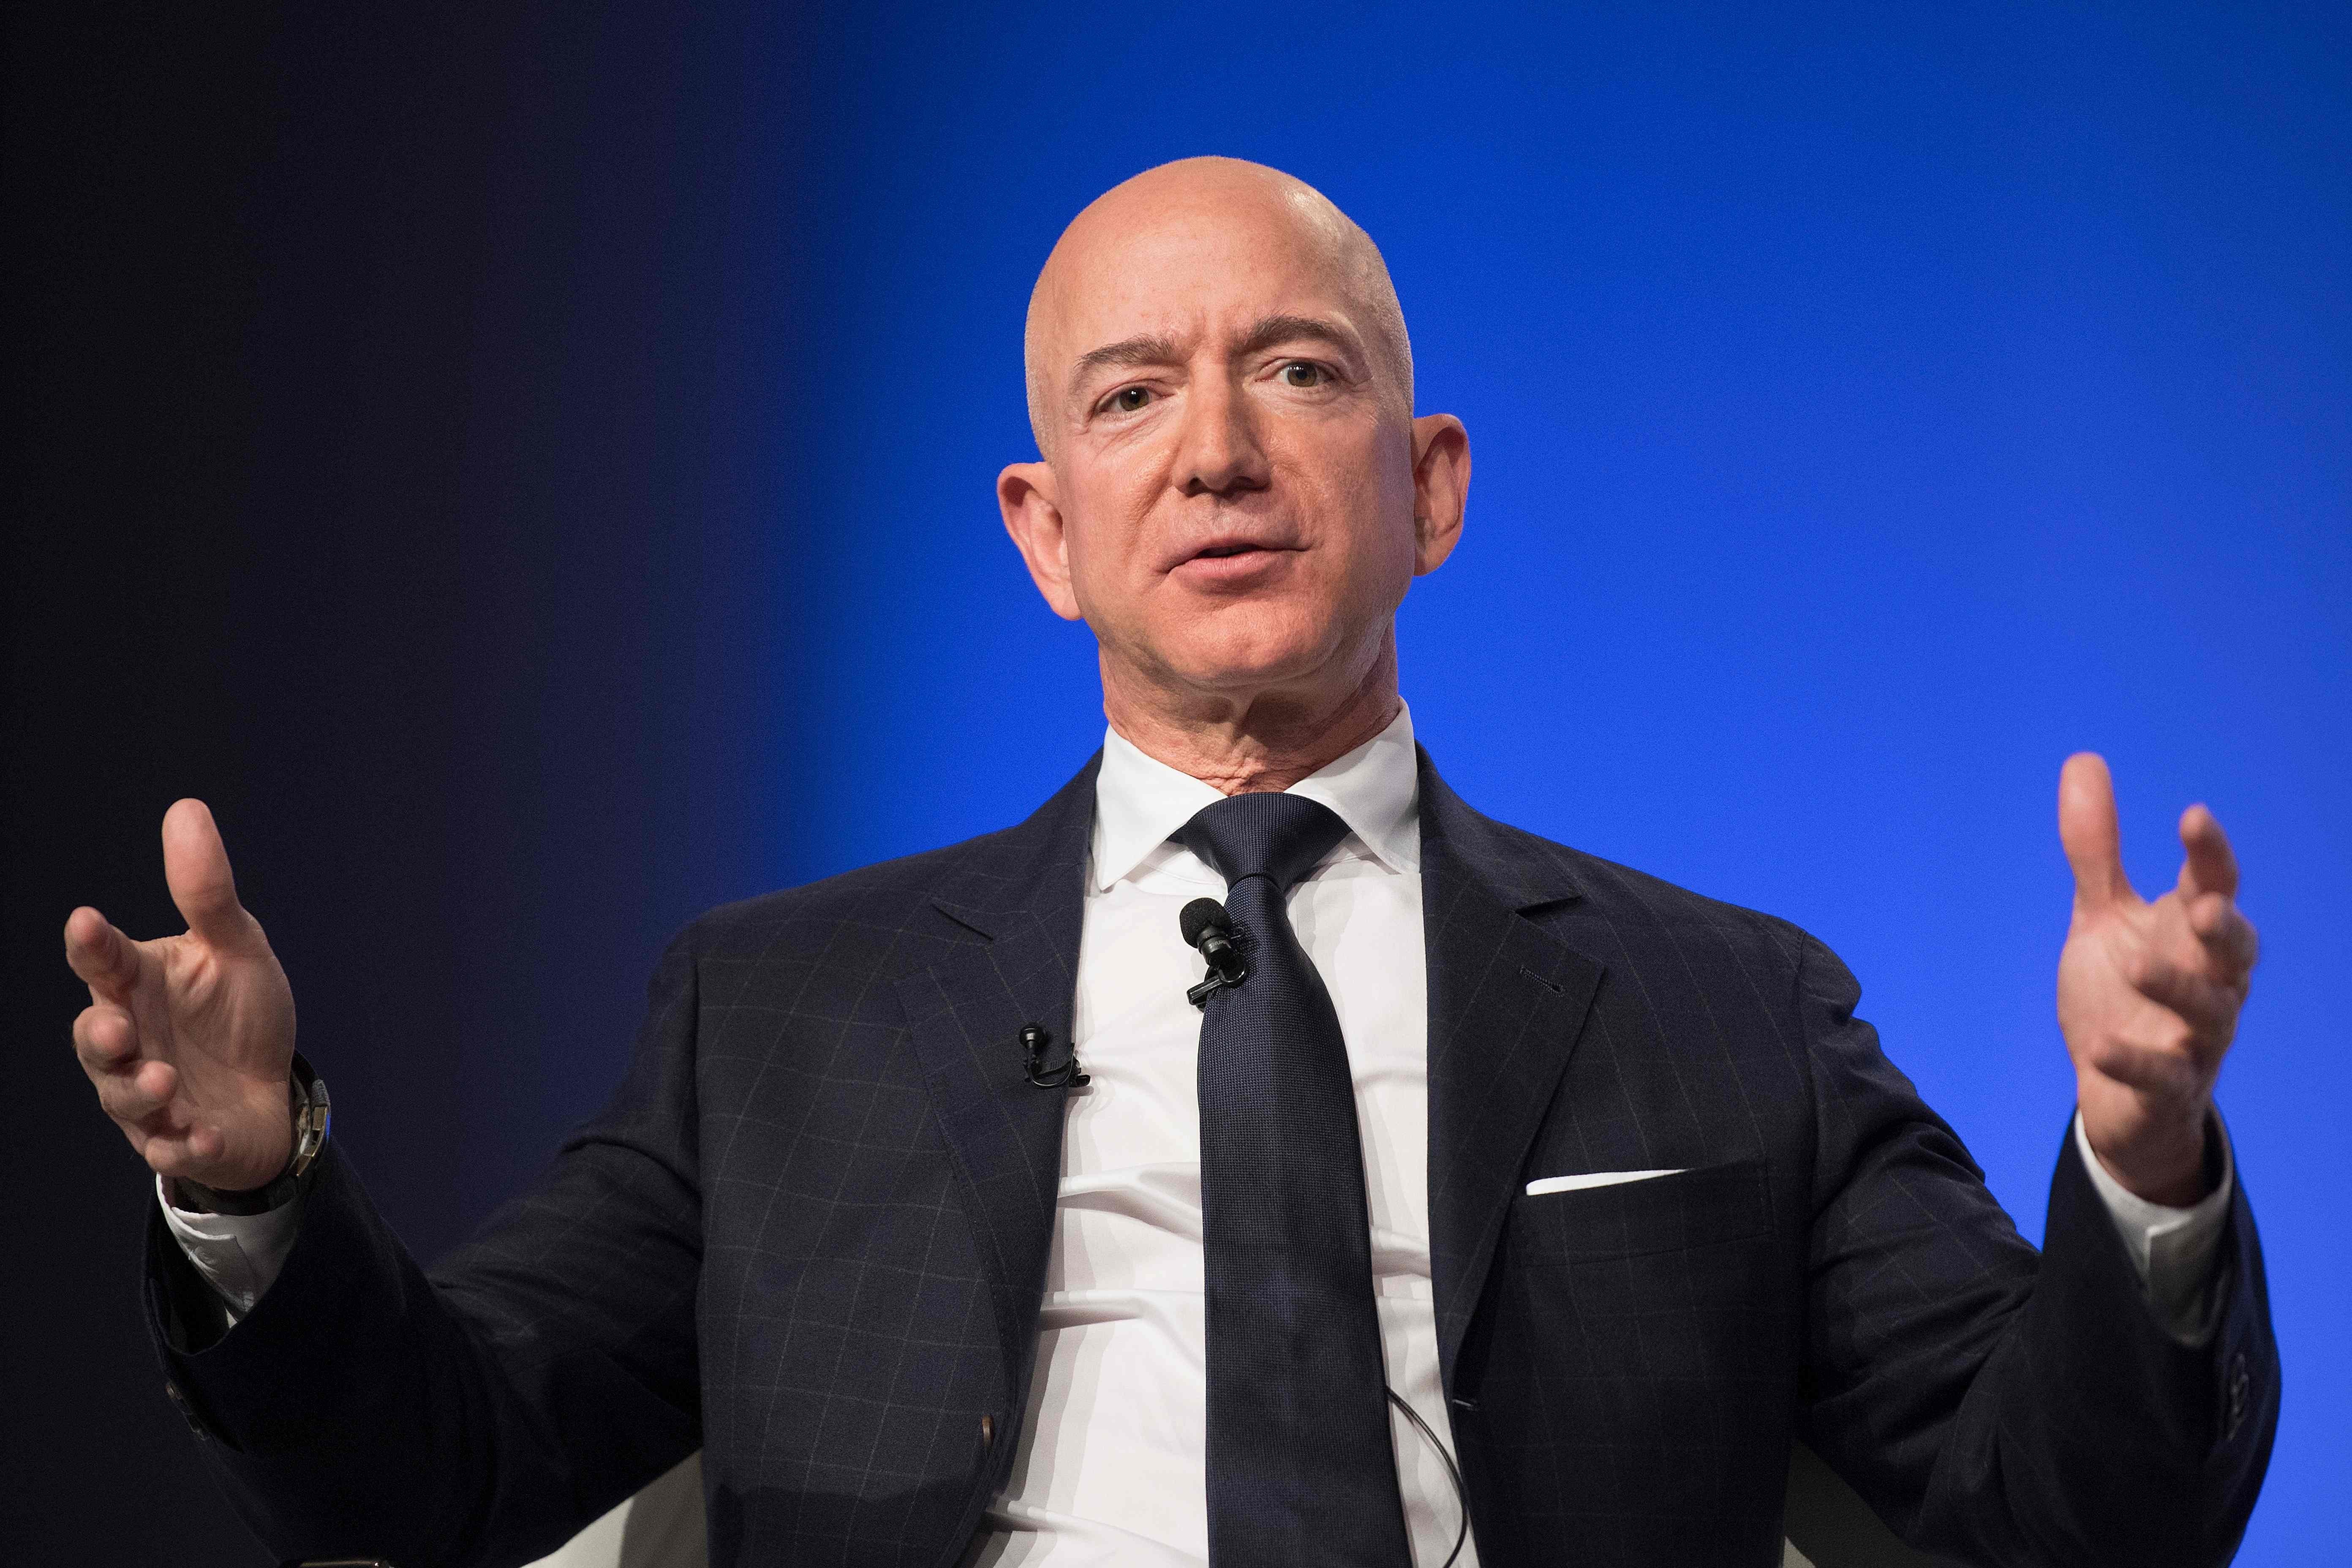 How Jeff Bezos Became One of the World's Richest People